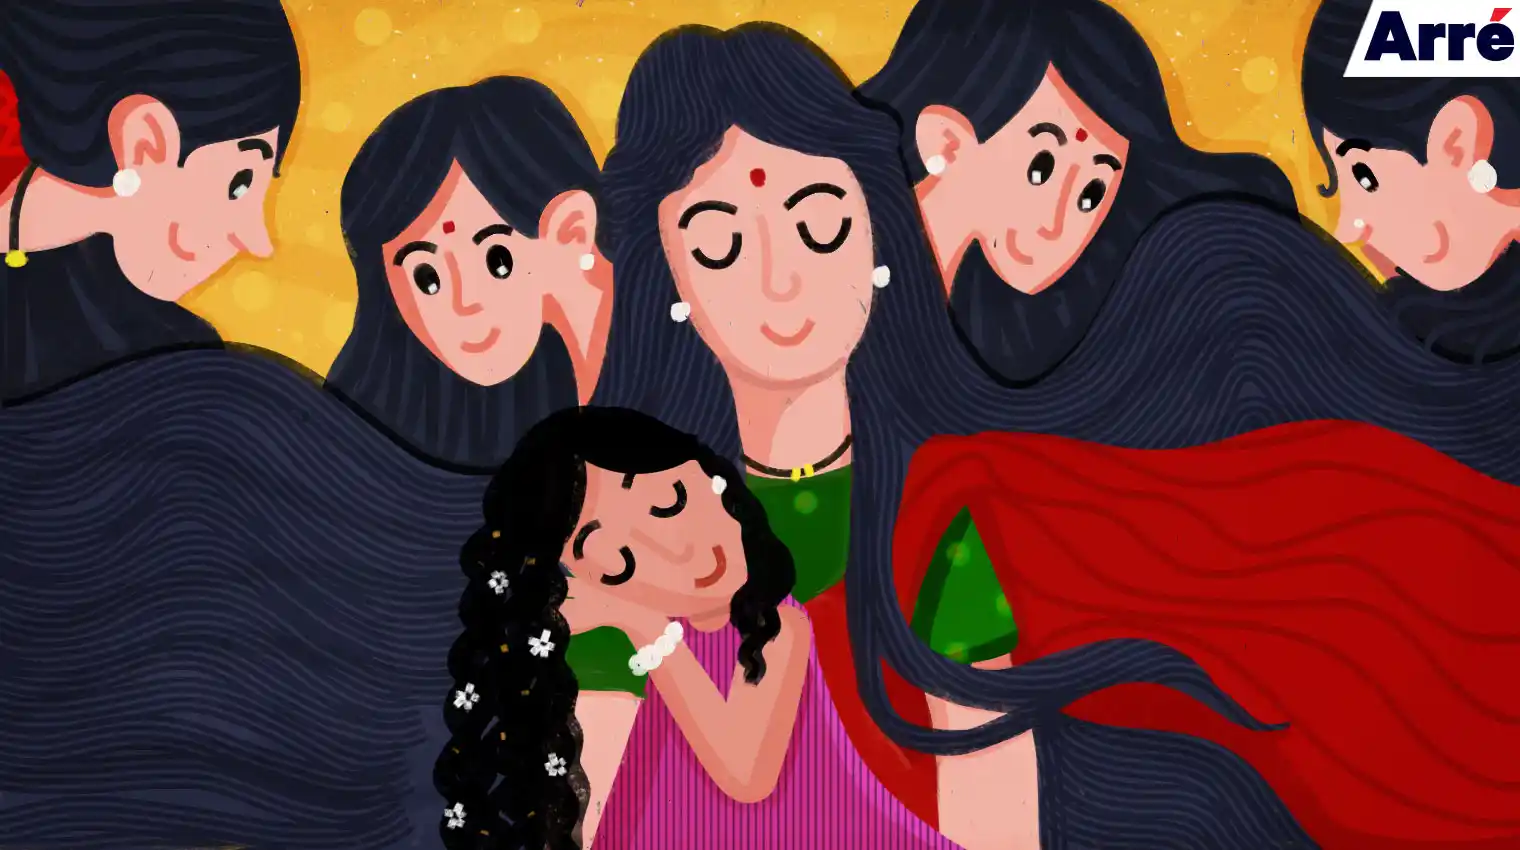 Mere Paas “Maa-si” Hai: Do We Thank Our Almost-Mothers Enough?